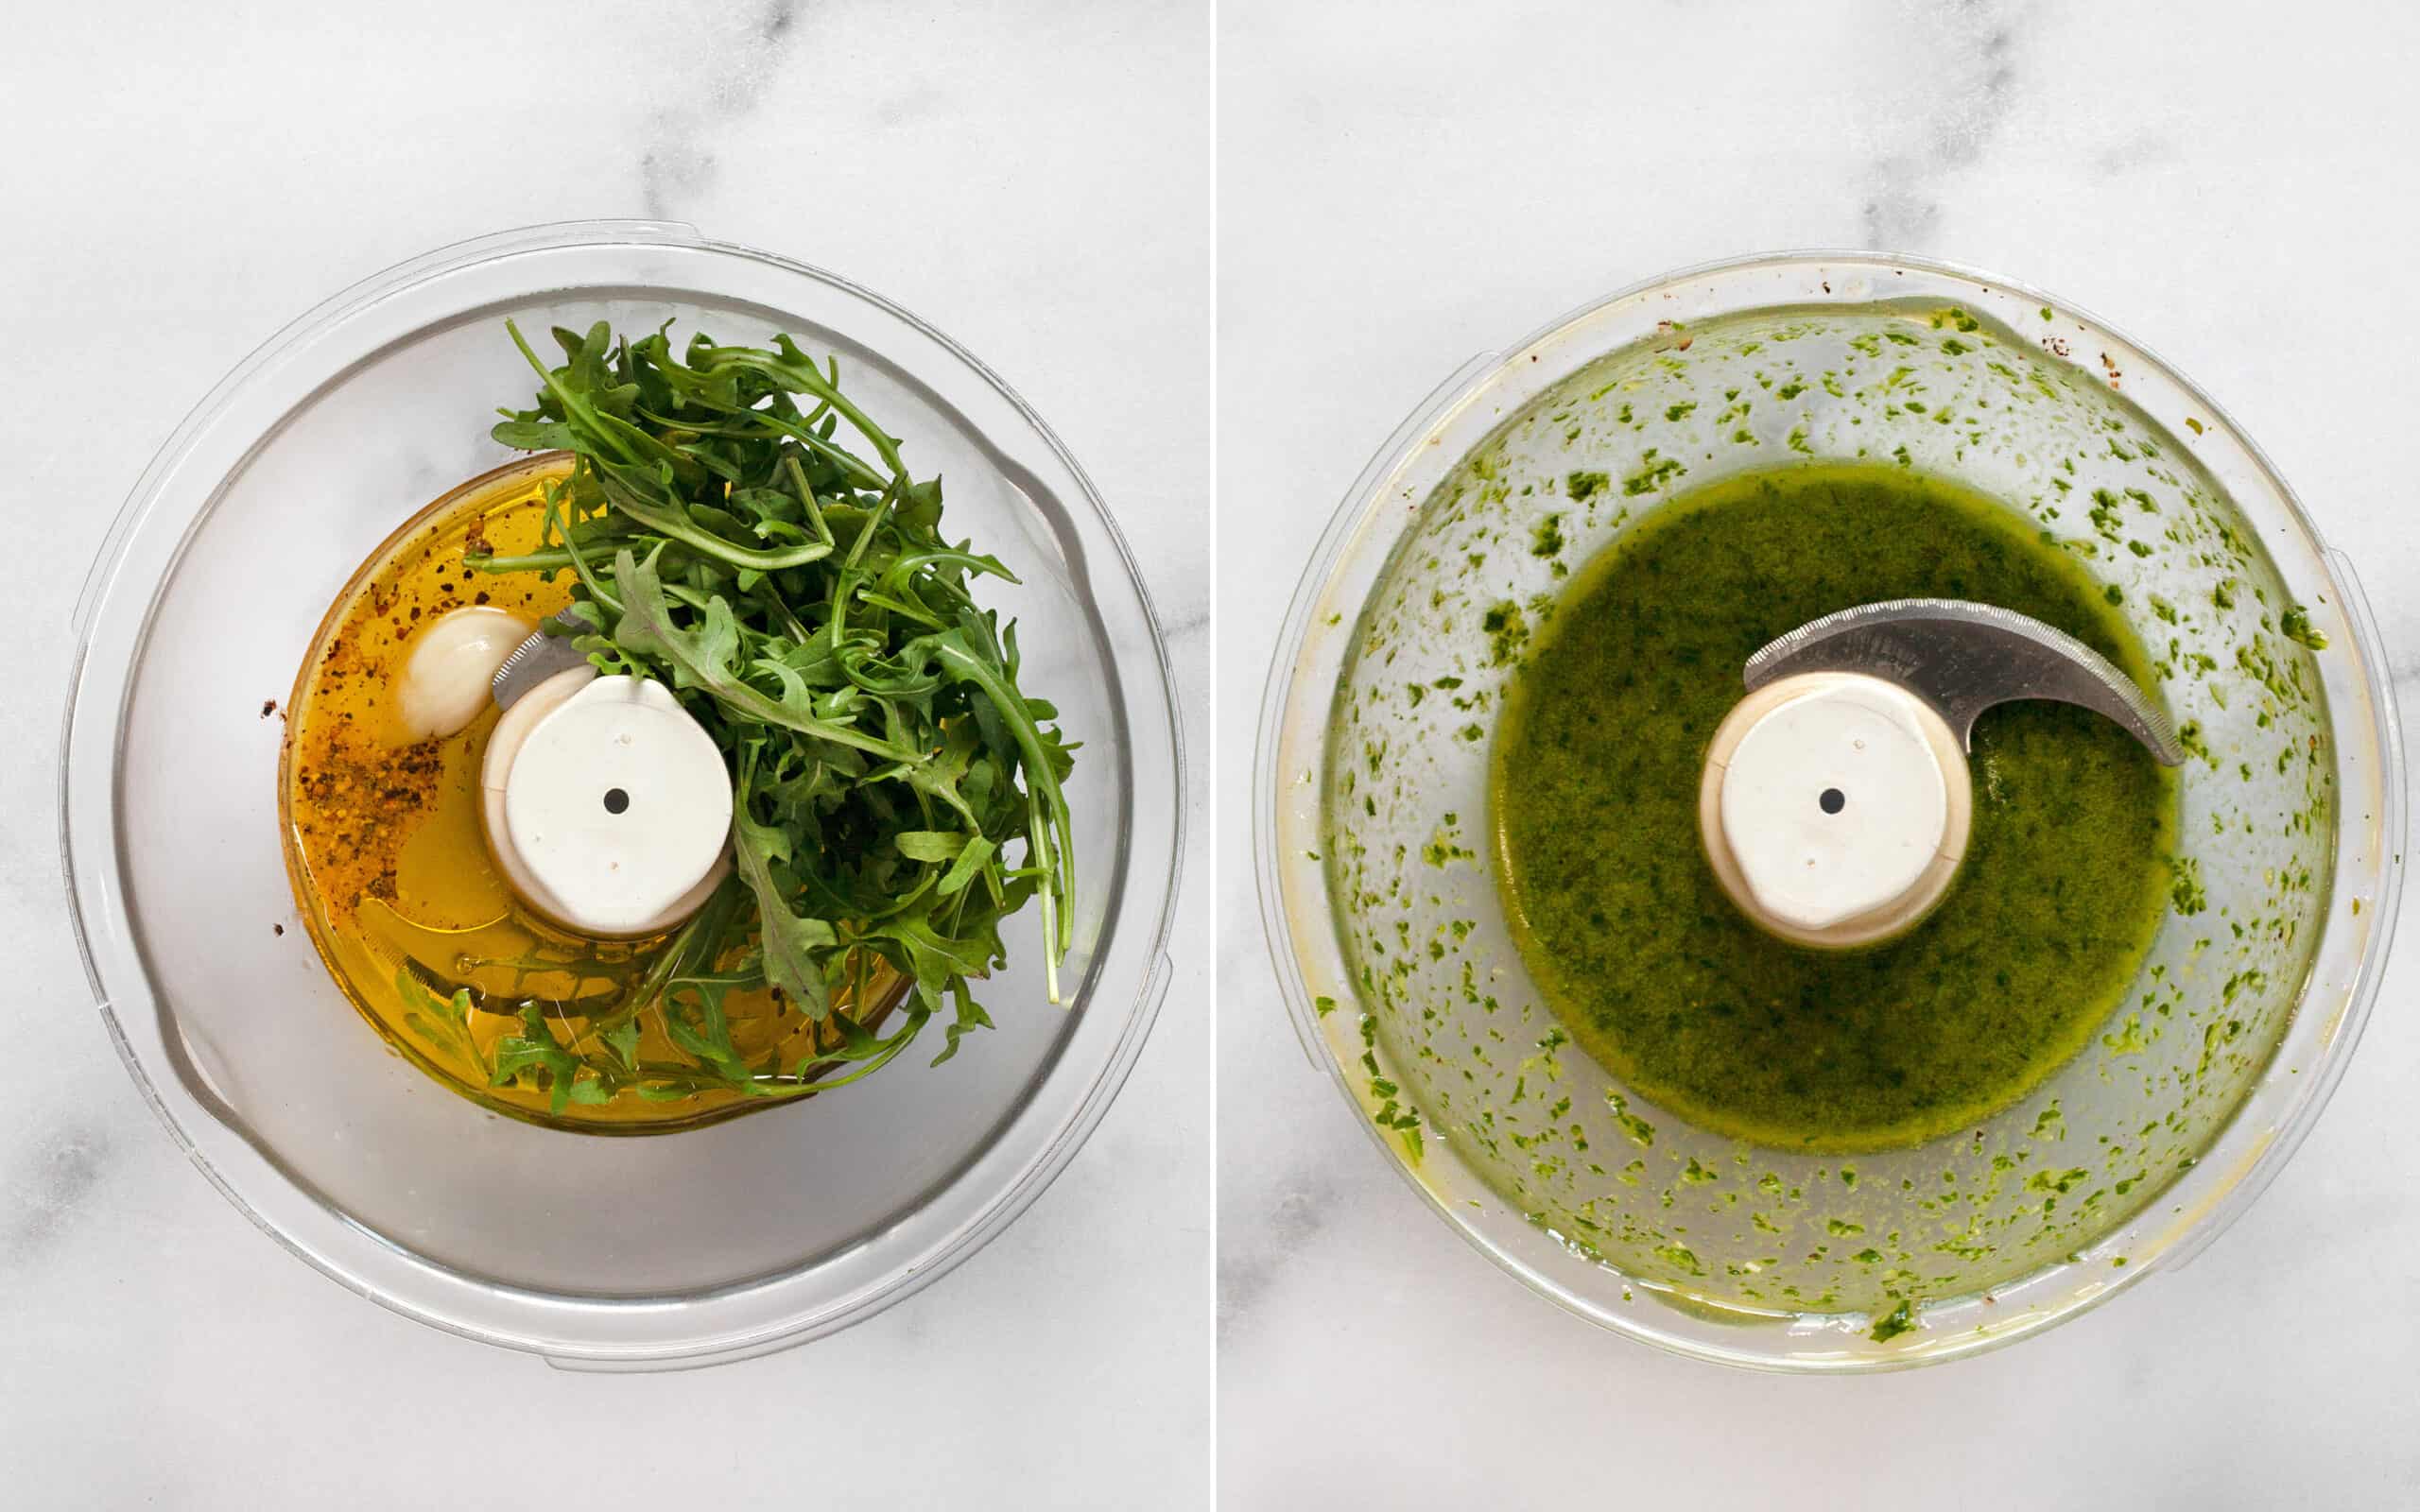 Arugula vinaigrette in a food processor bowl before and after it is pureed.